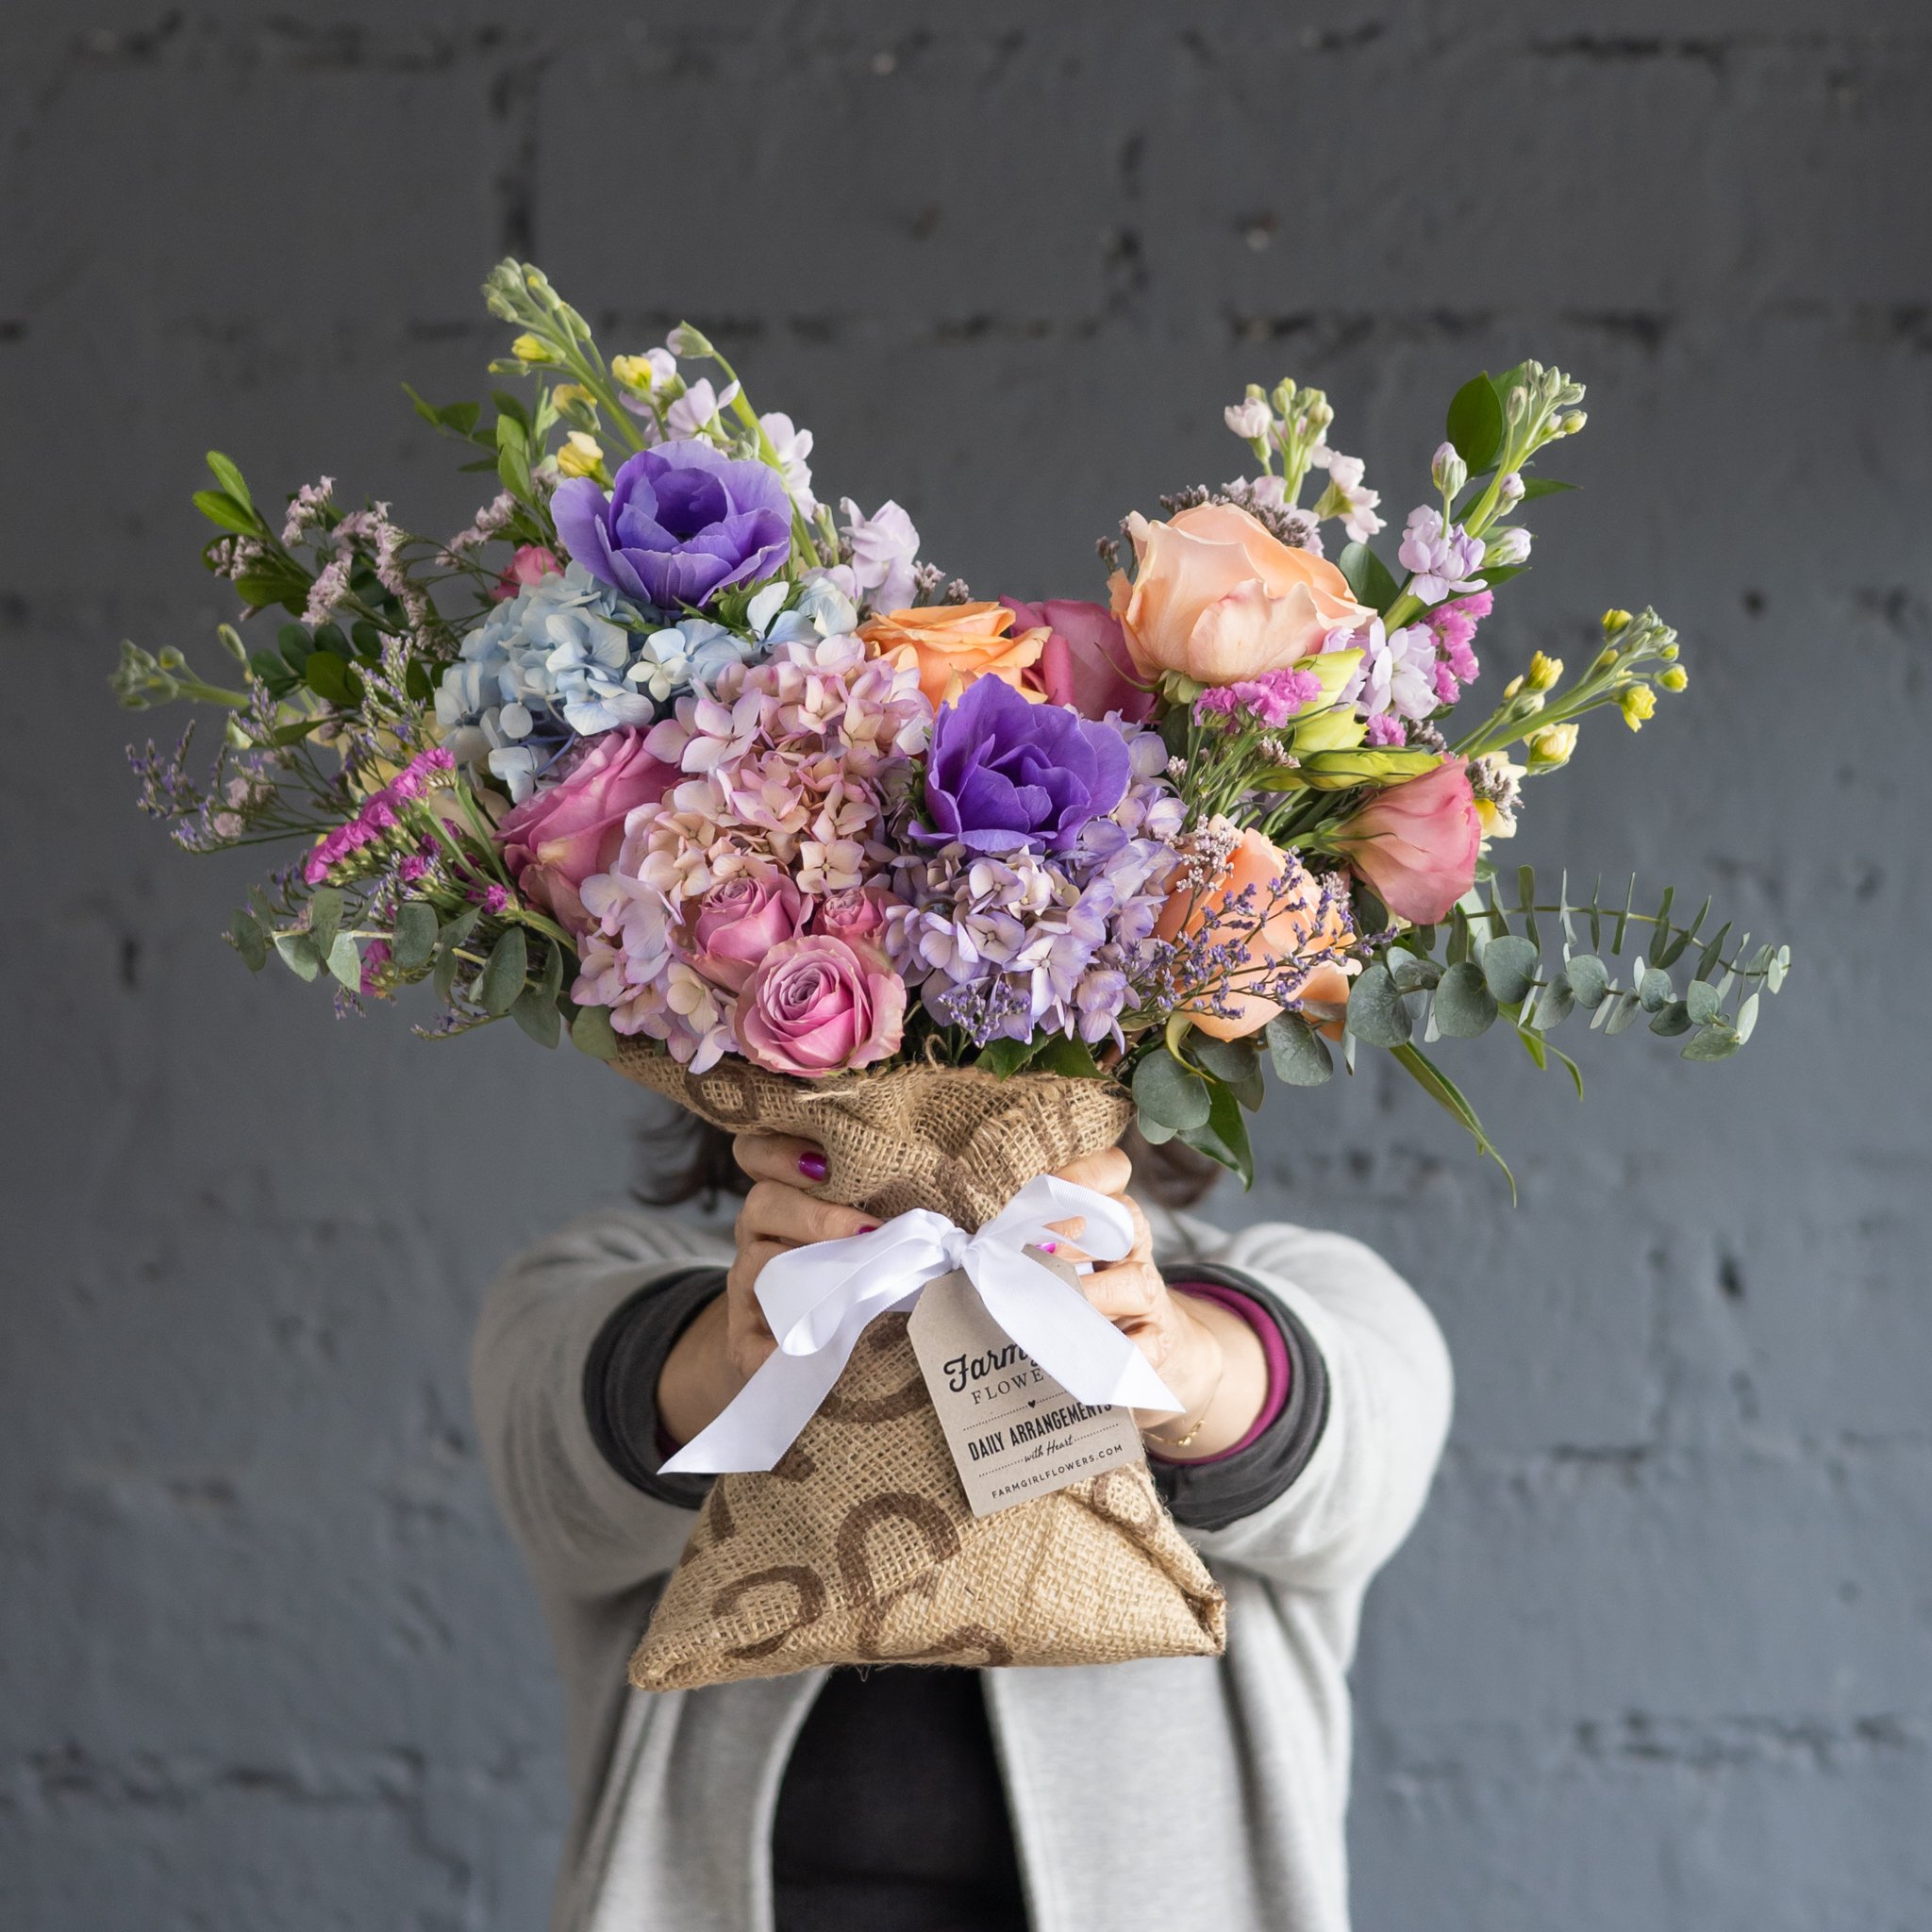 A pink and purple floral bouquet wrapped in burlap being held up with two hands, covering the person's face, in front of a grey brick wall.